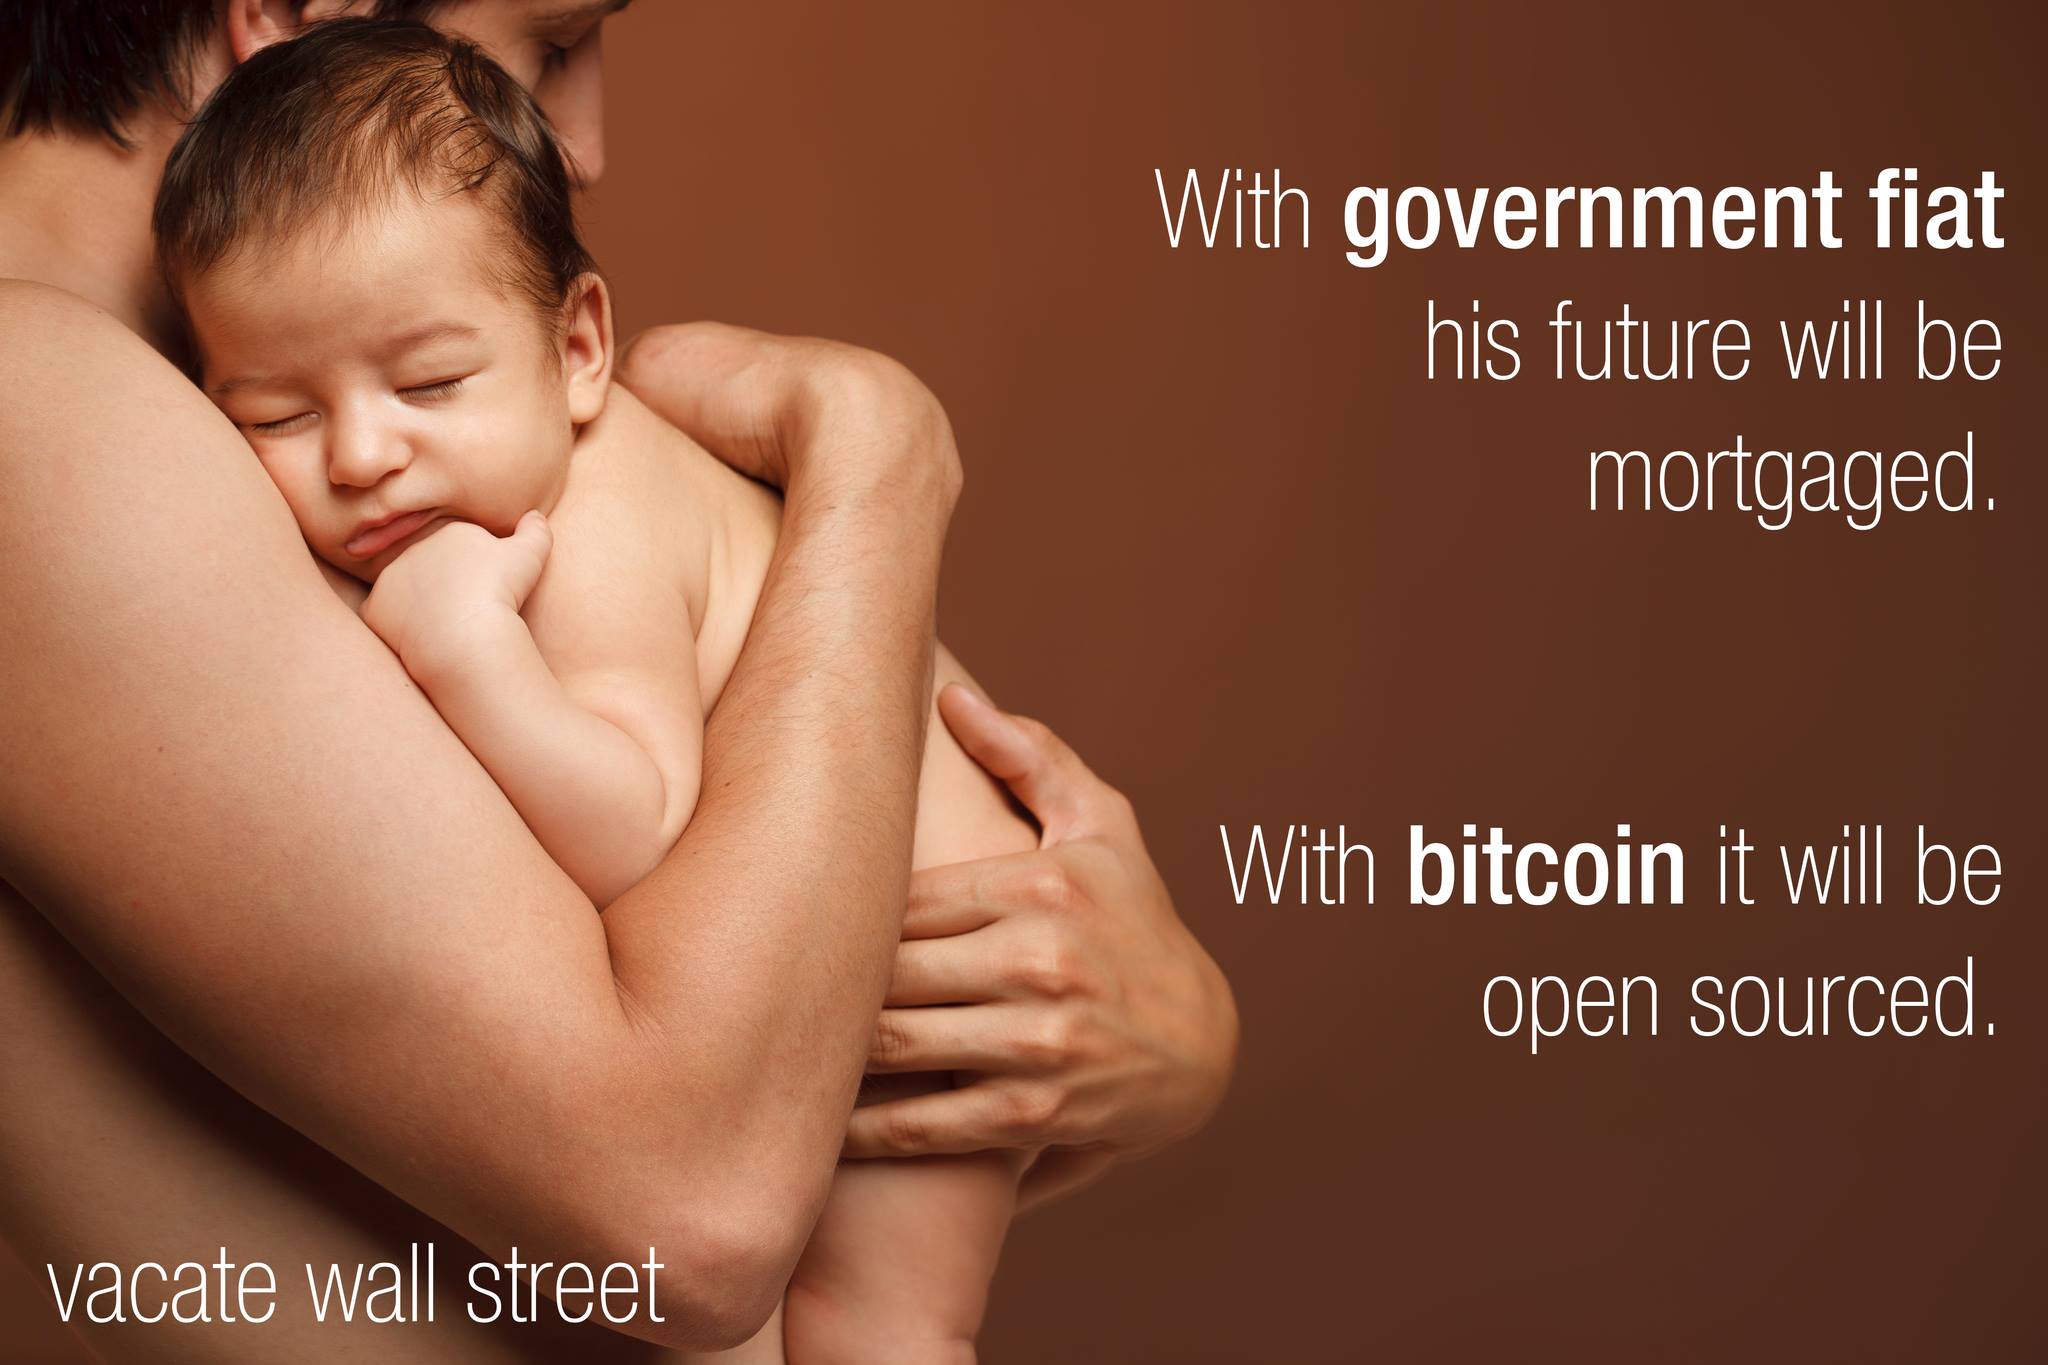 Bitcoin's Social Contract Must Be Resilient to the Whims of Future Generations